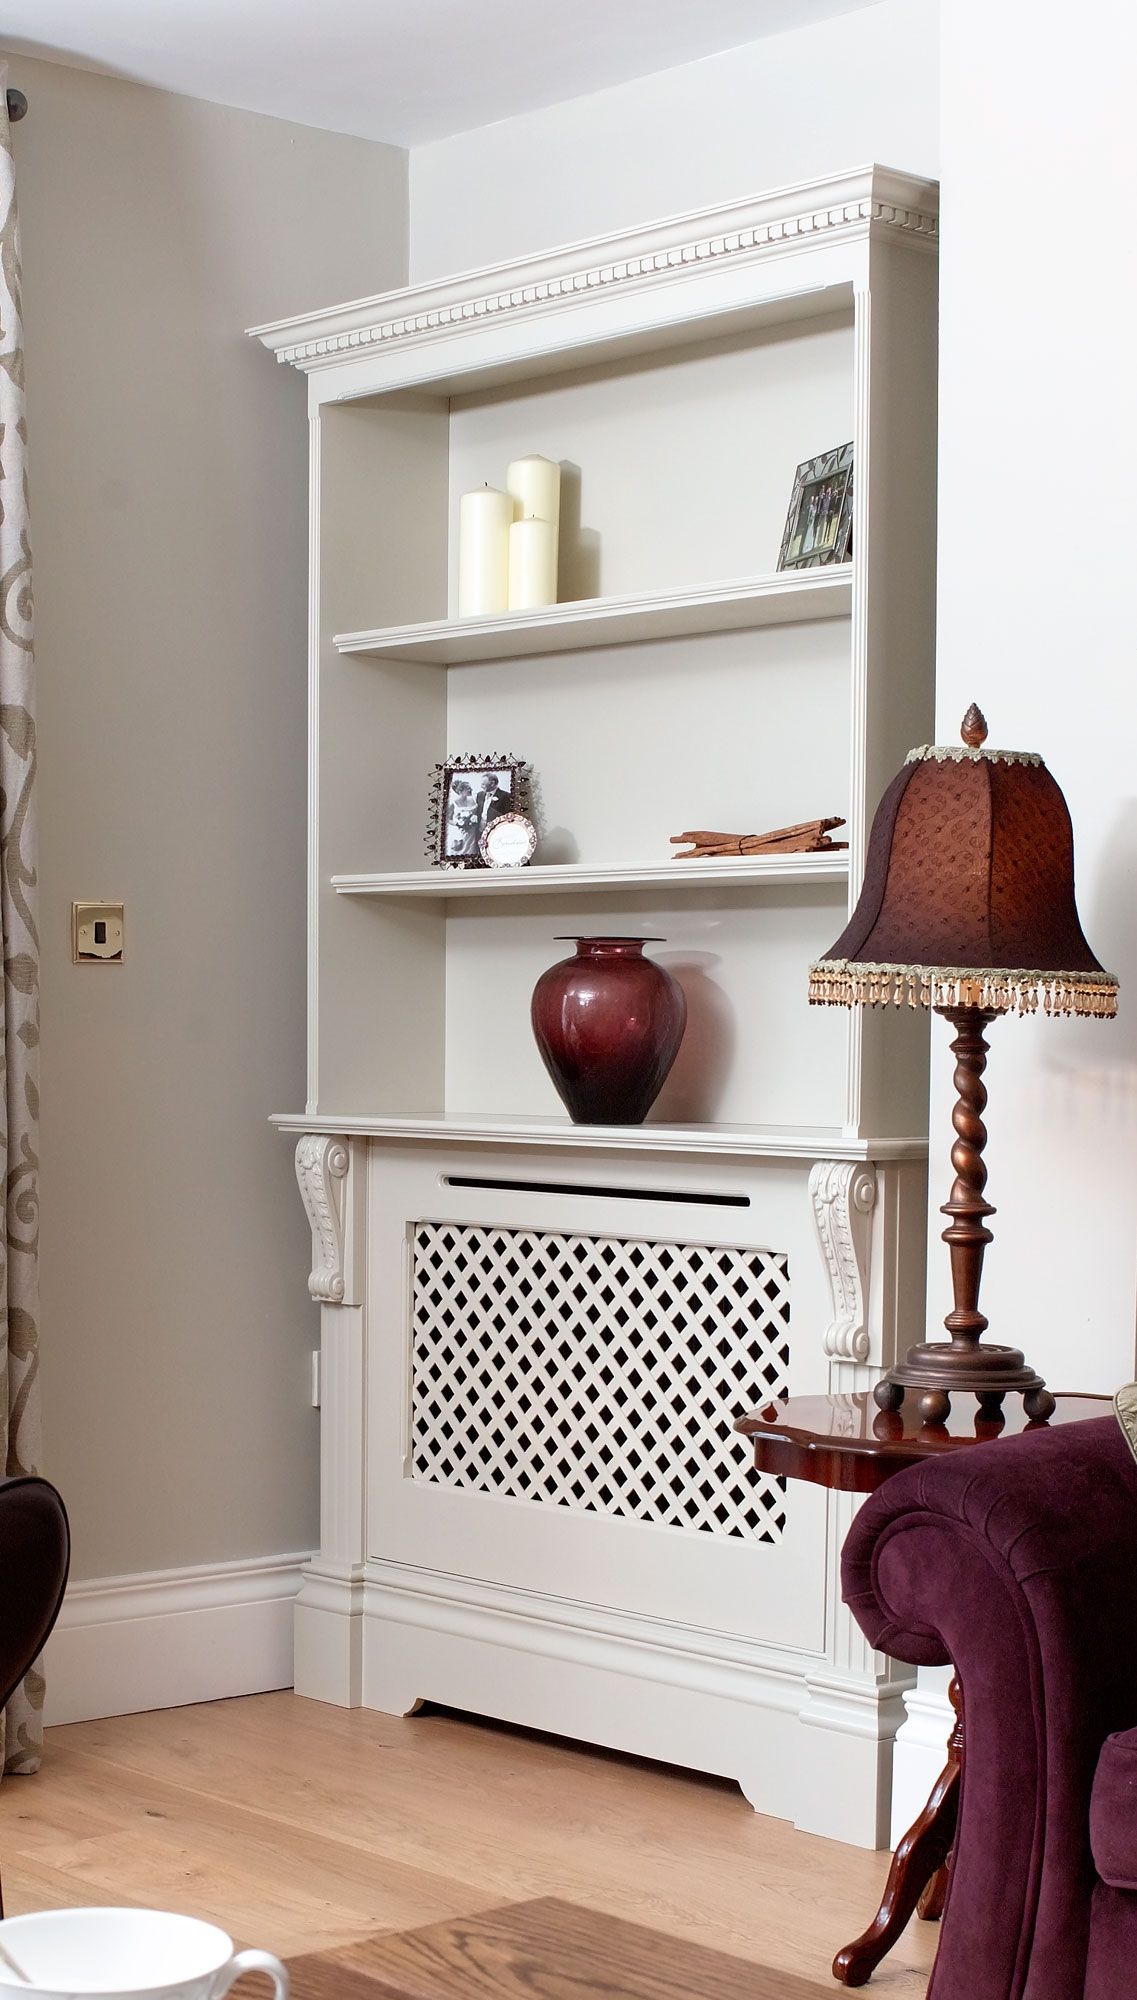 Modern Interior Decorating With Colorful Radiators And Attractive In Radiator Cover With Bookcase Above (View 2 of 15)